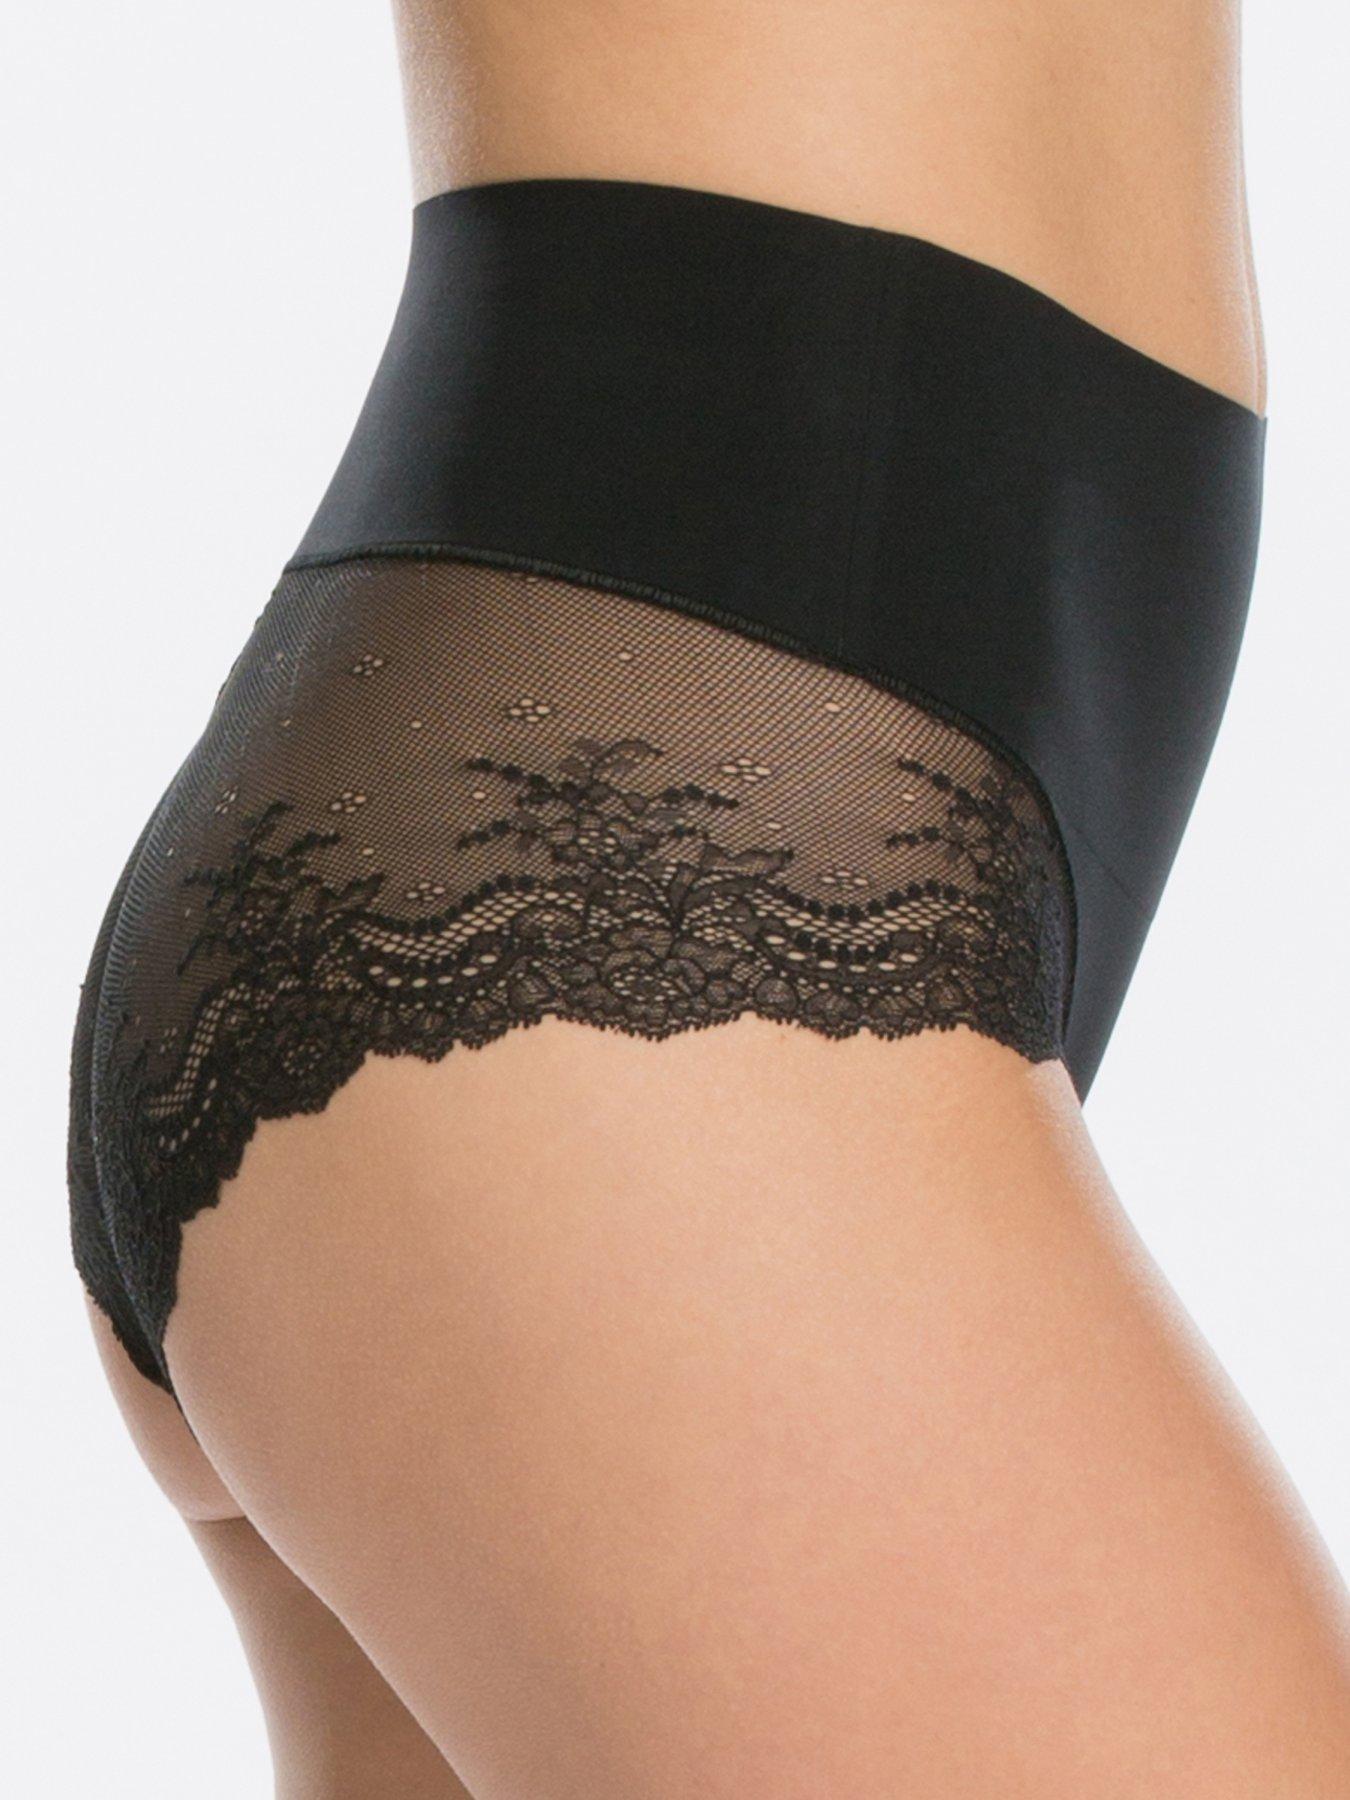 Spanx Undie-tectable Light Control Lace Hi-hipster